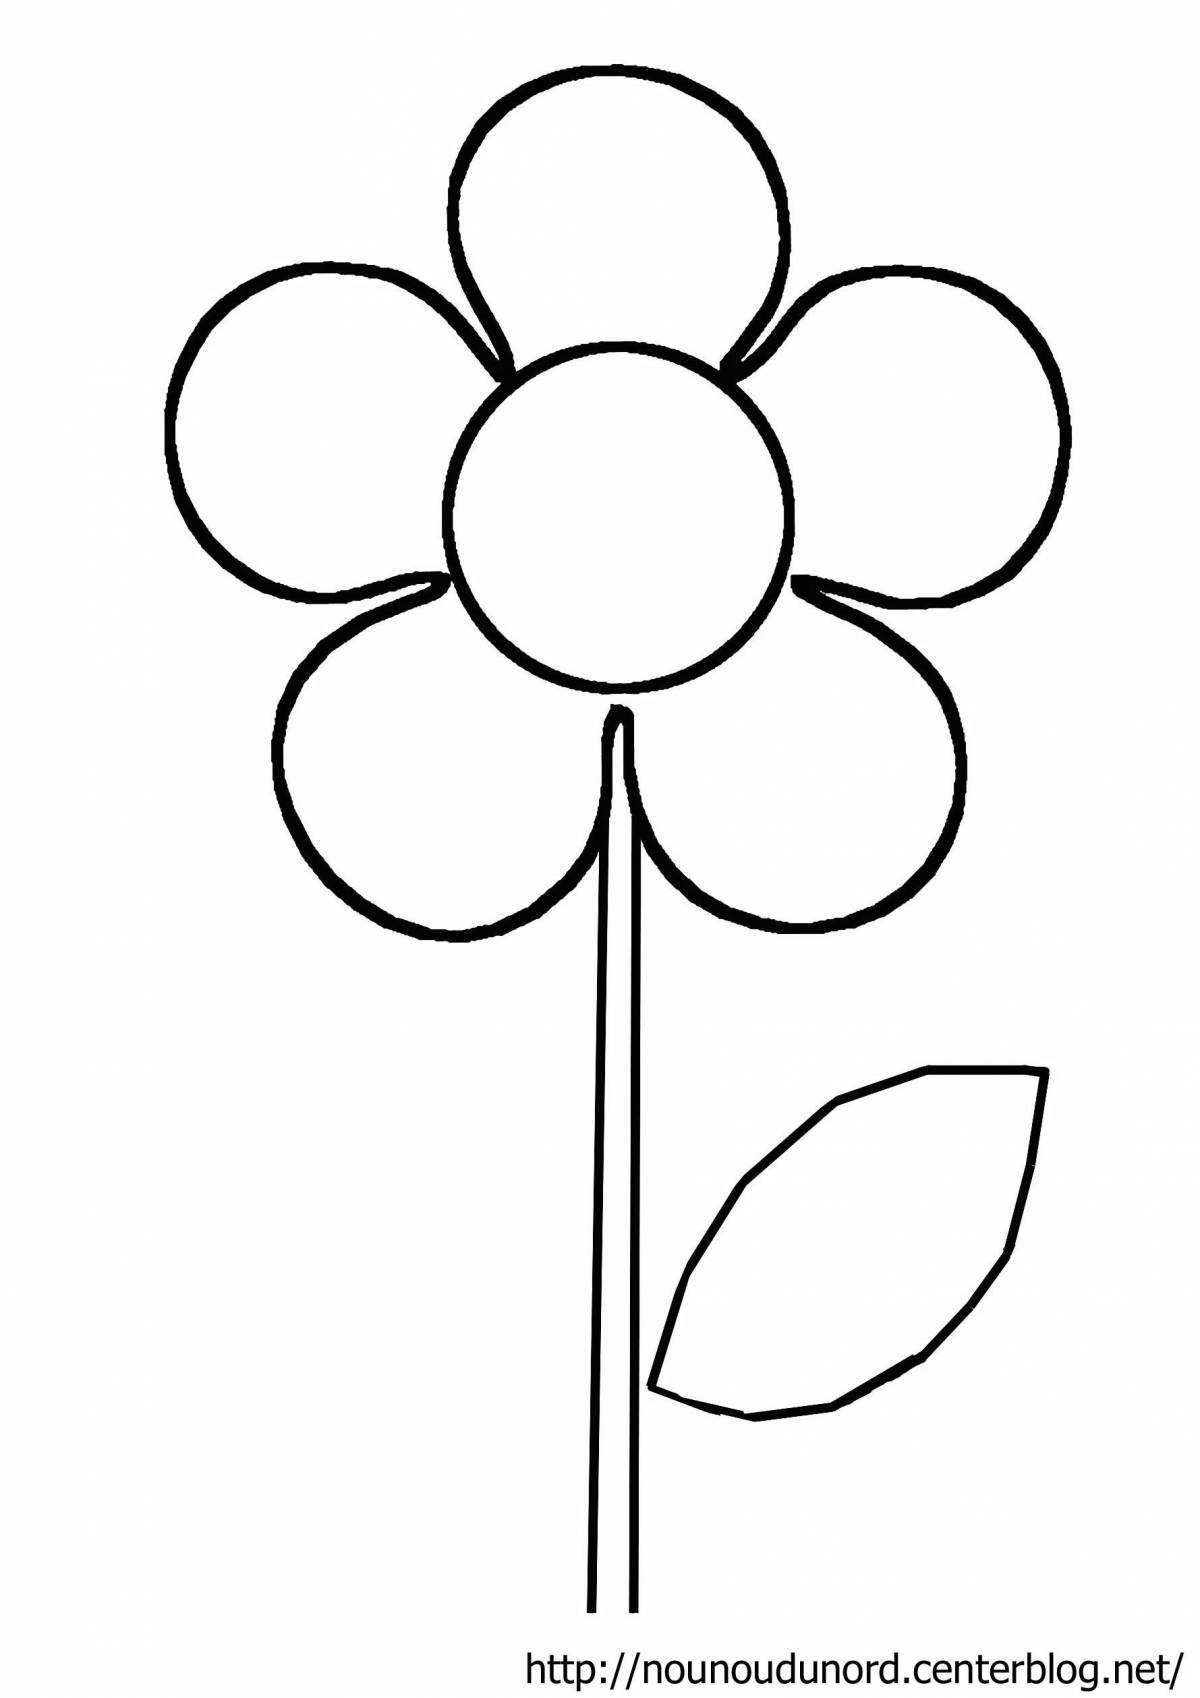 Impressive flower coloring book for toddlers 2 3 years old